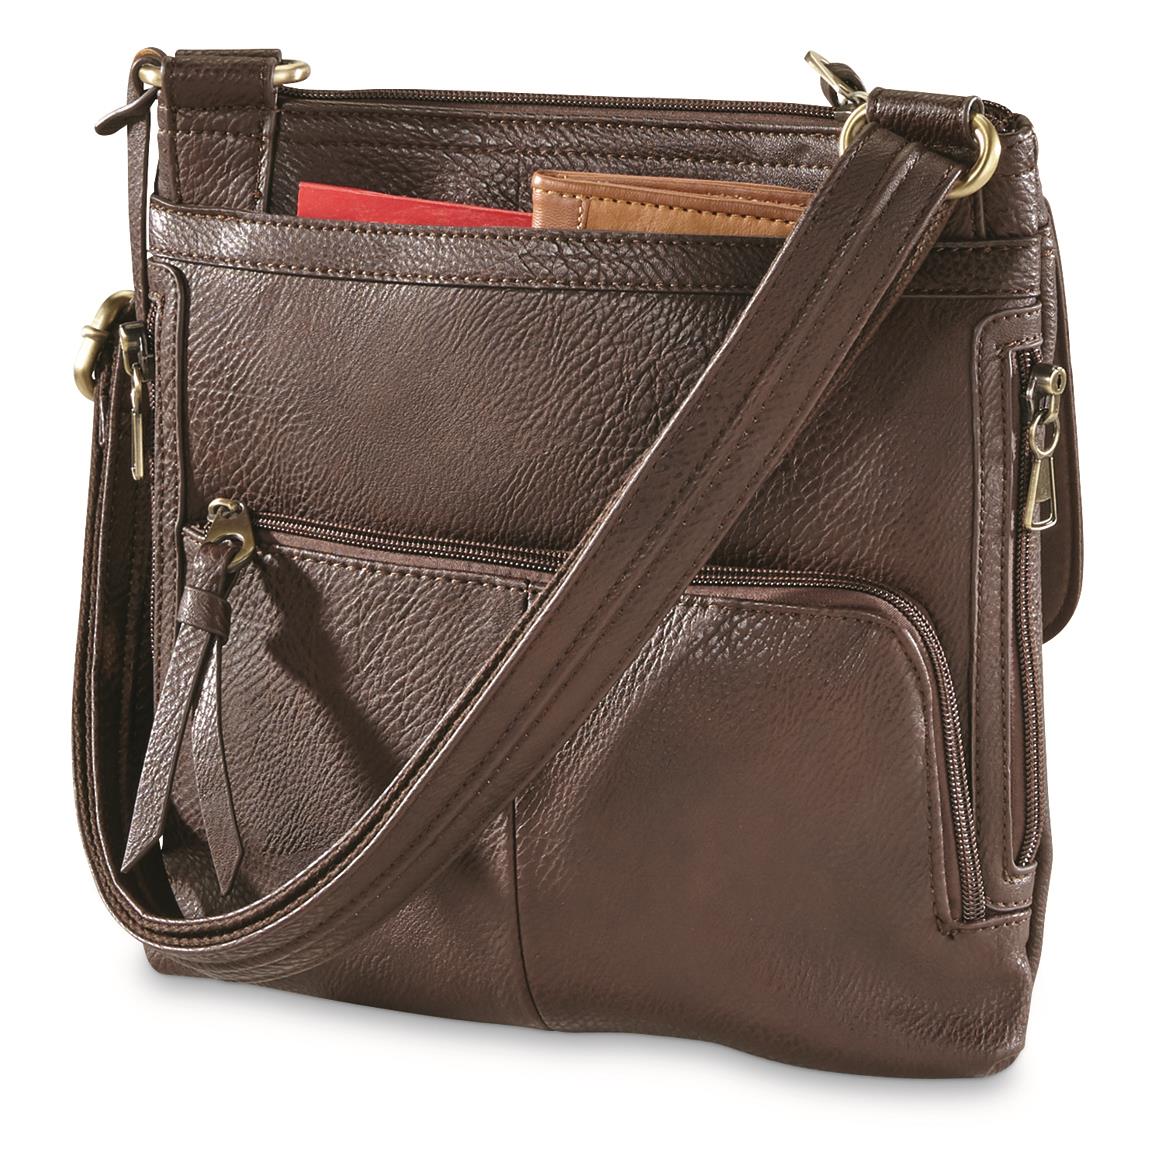 Concealed Carry Purses Bags | Paul Smith